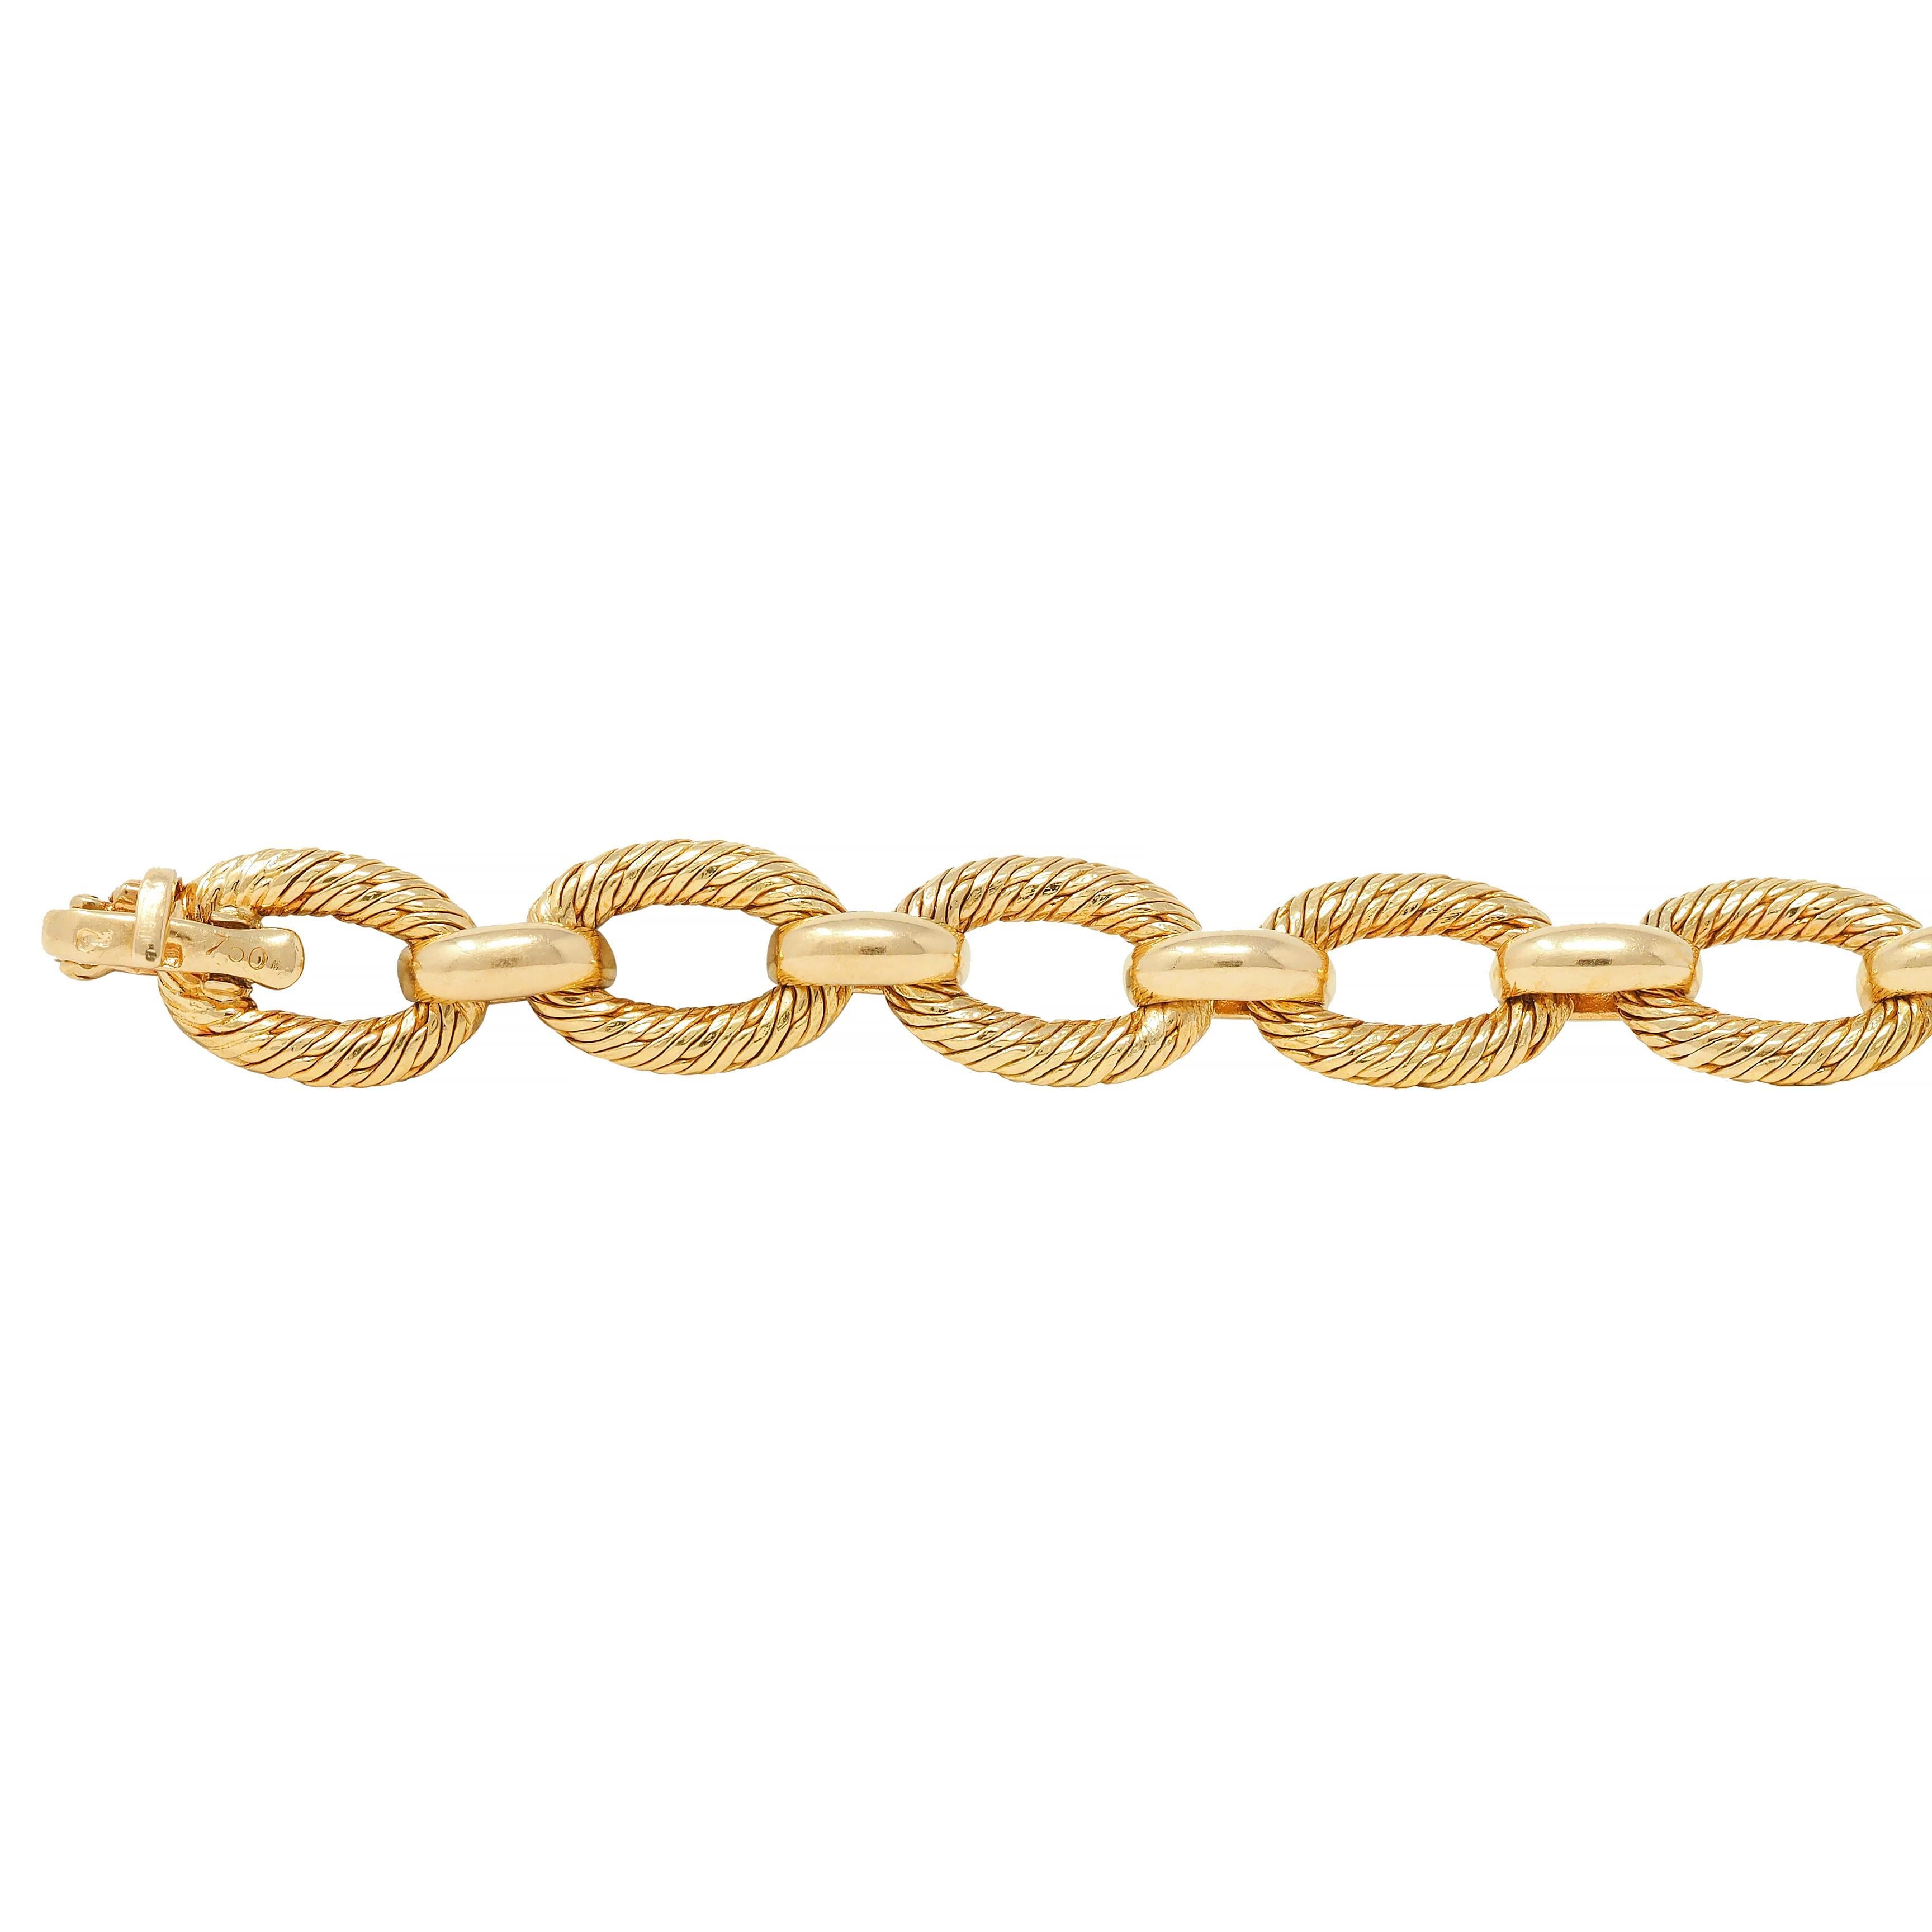 Comprised of oval and bar links alternating in pattern
Oval links feature engraved twist texture
Bar links are smooth with high polish 
Completed by concealed clasp closure
Stamped for 18 karat gold 
Fully signed Tiffany & Co., France
Circa: